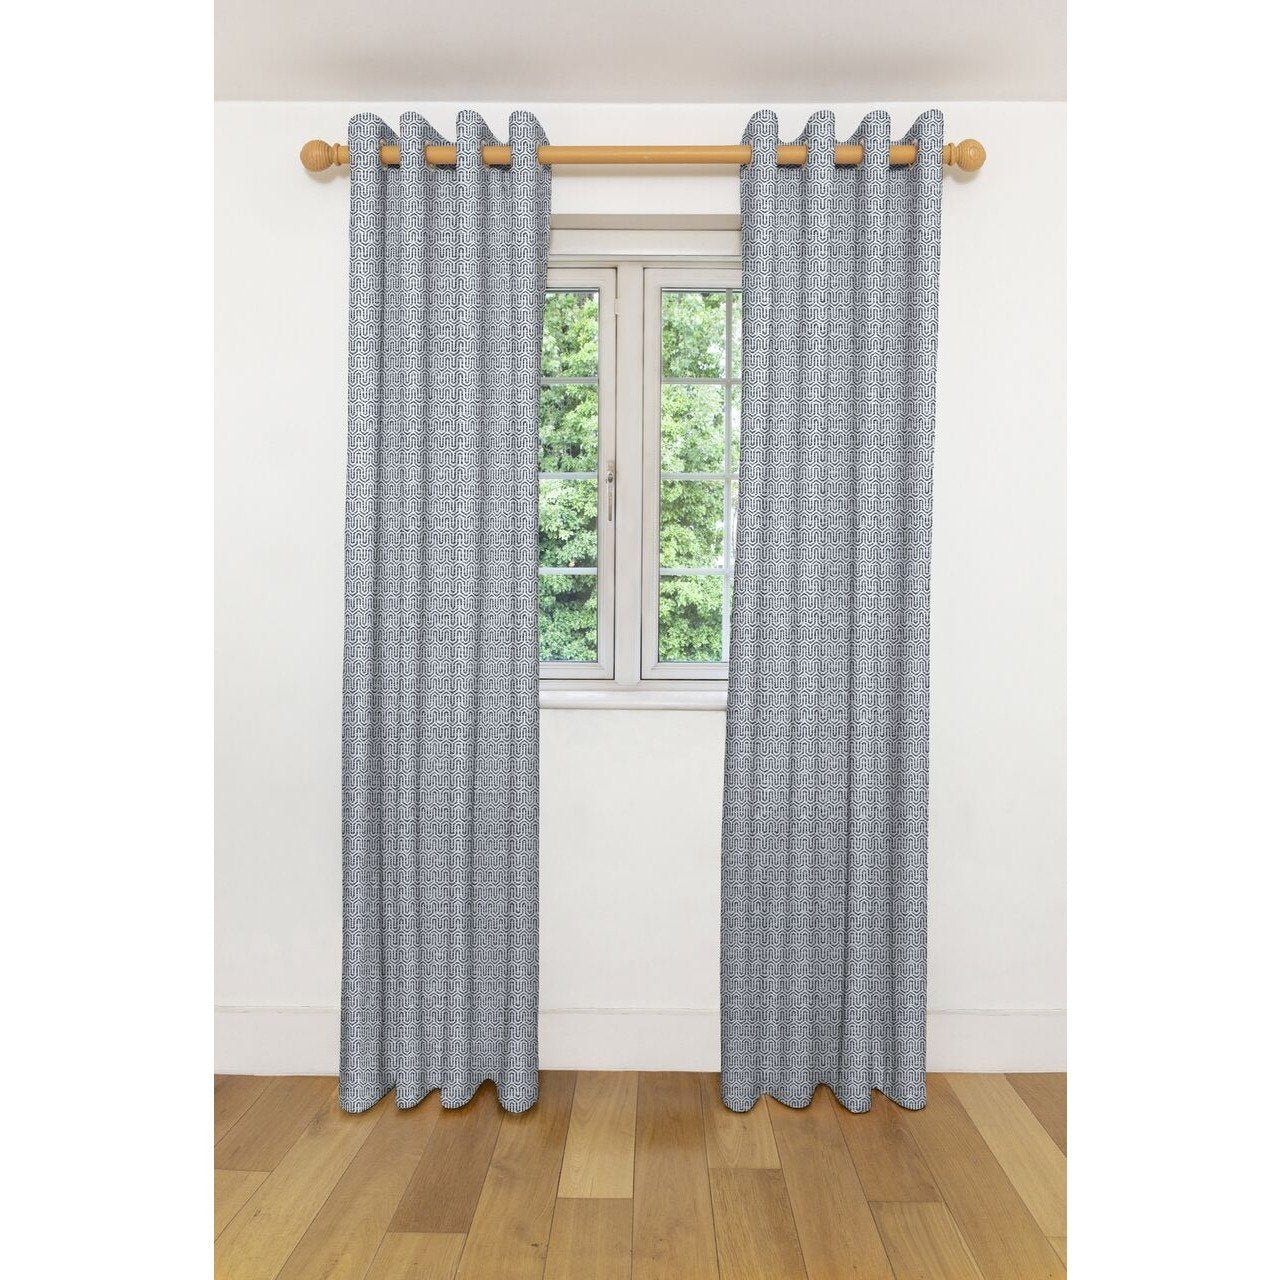 McAlister Textiles Costa Rica Black + White Curtains Tailored Curtains 116cm(w) x 182cm(d) (46" x 72") 